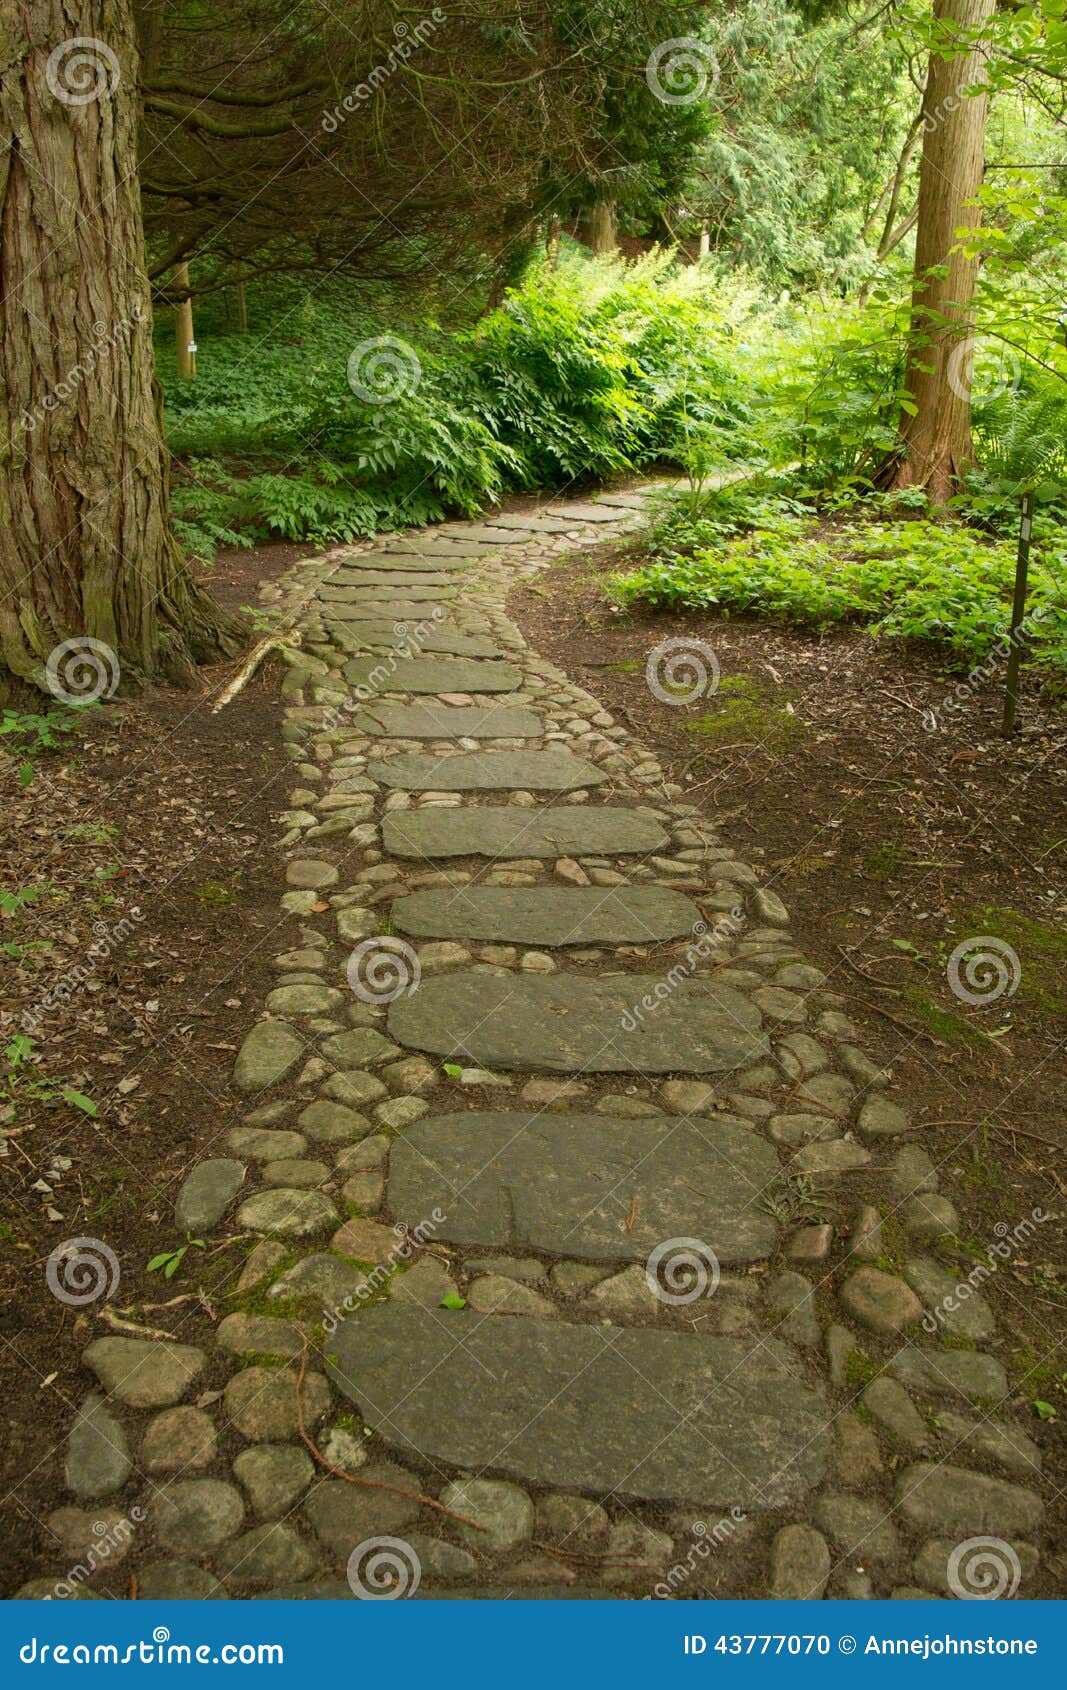  Stone  Path  Through The Forest  Stock Photo Image 43777070